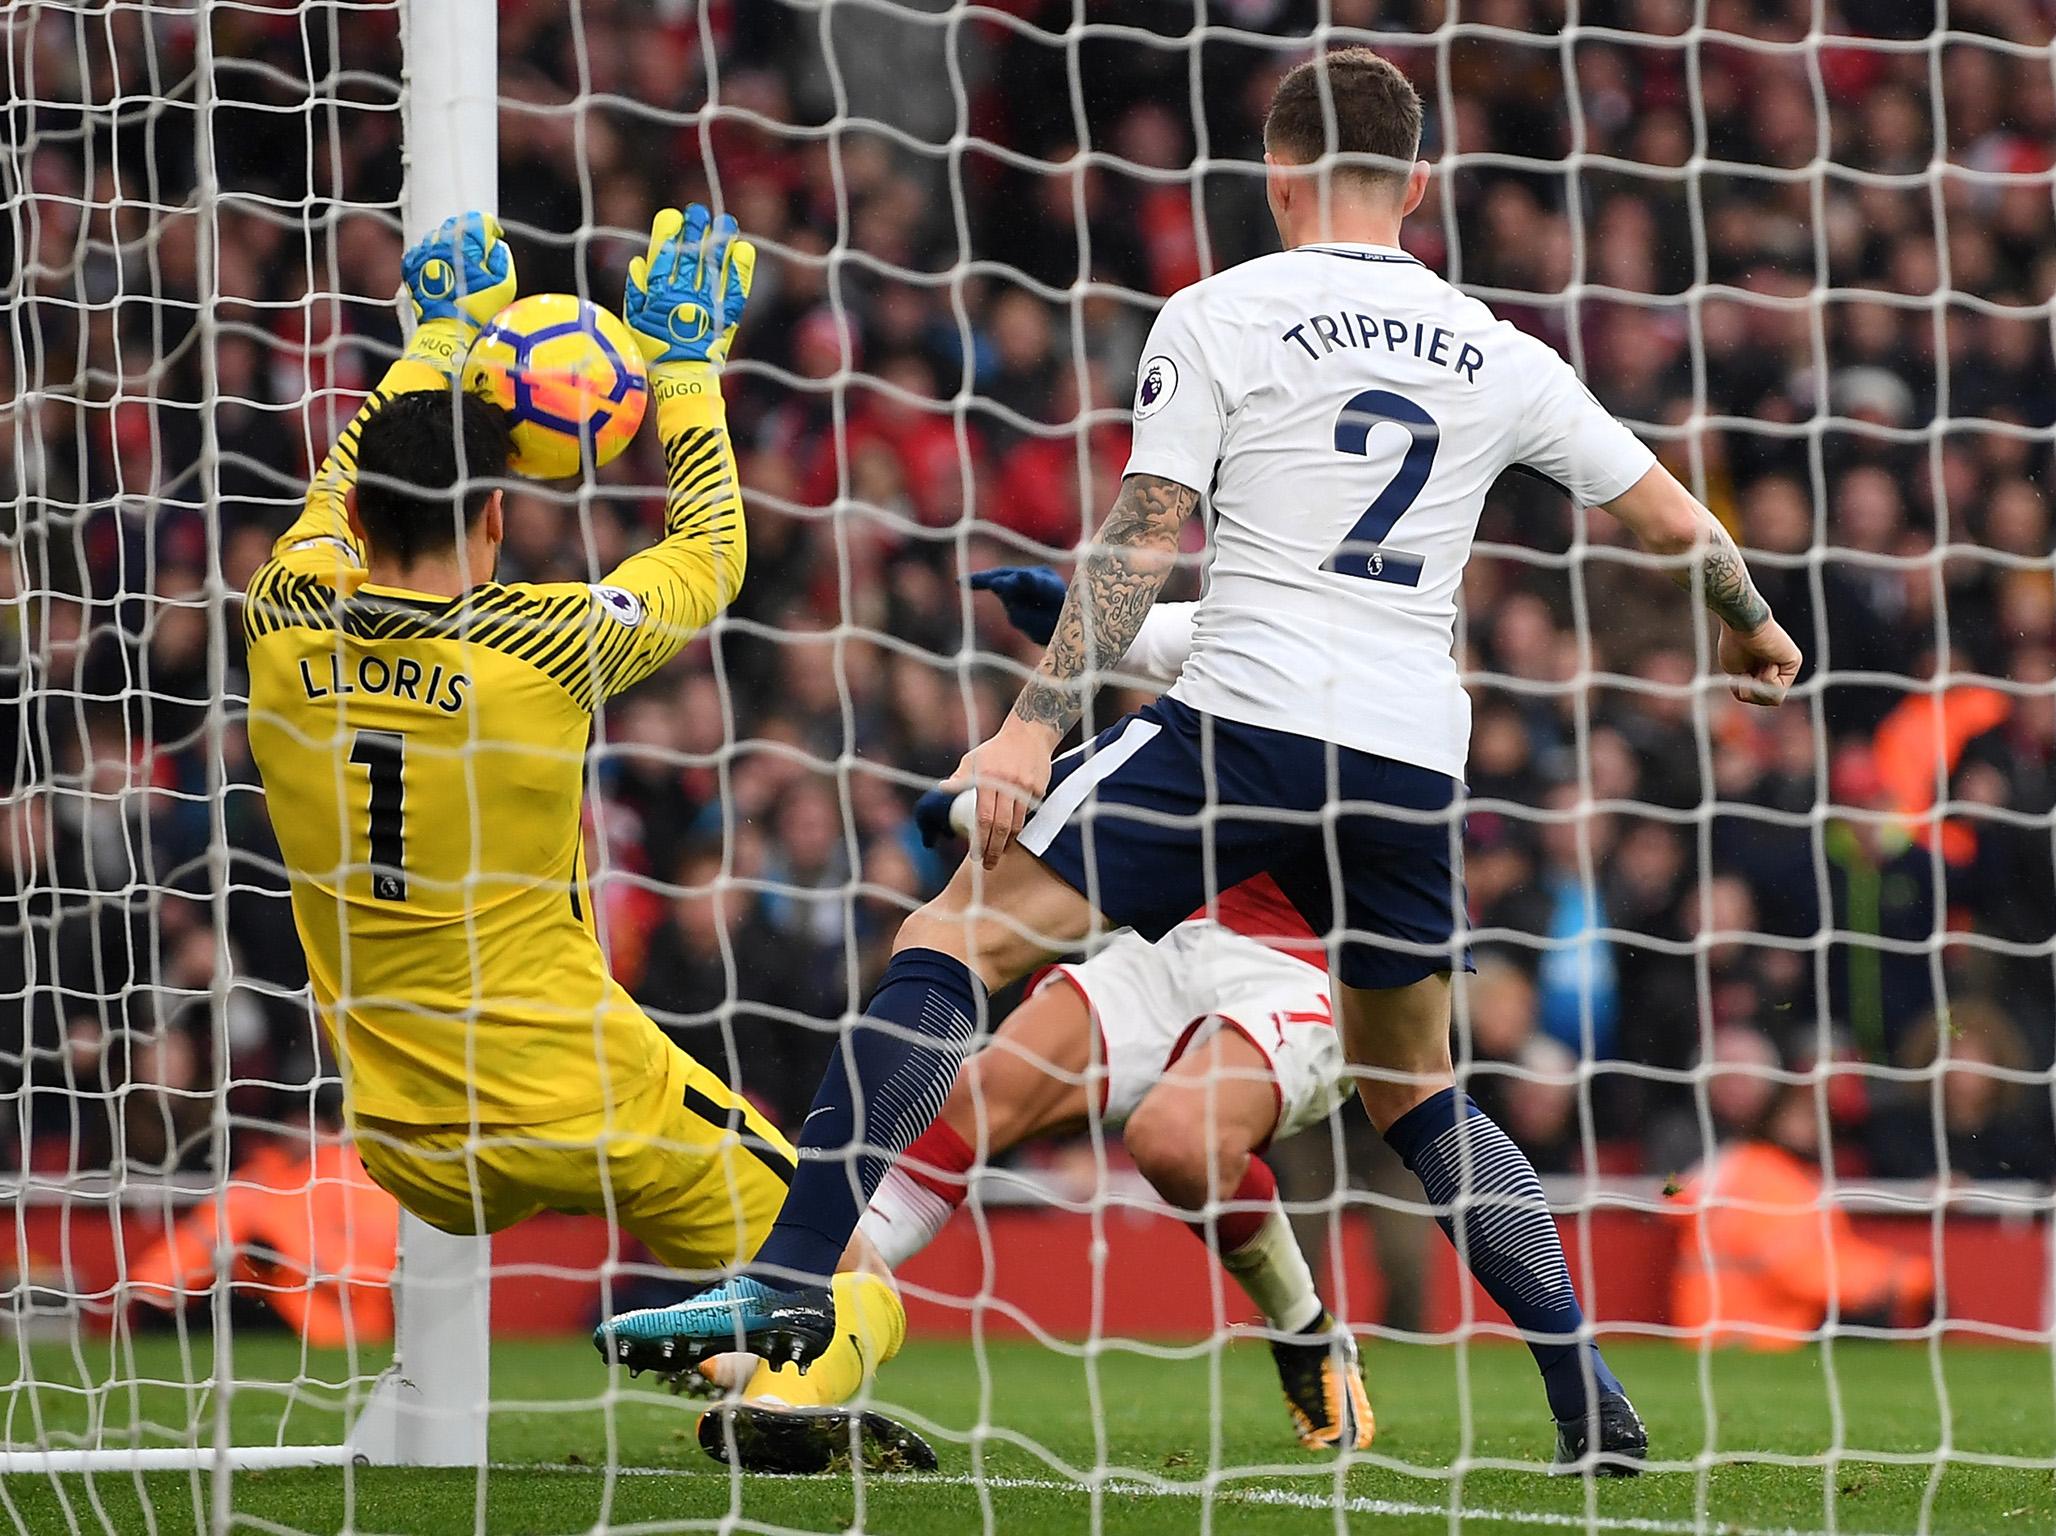 Trippier struggled to get forward and was poor for Arsenal's second goal